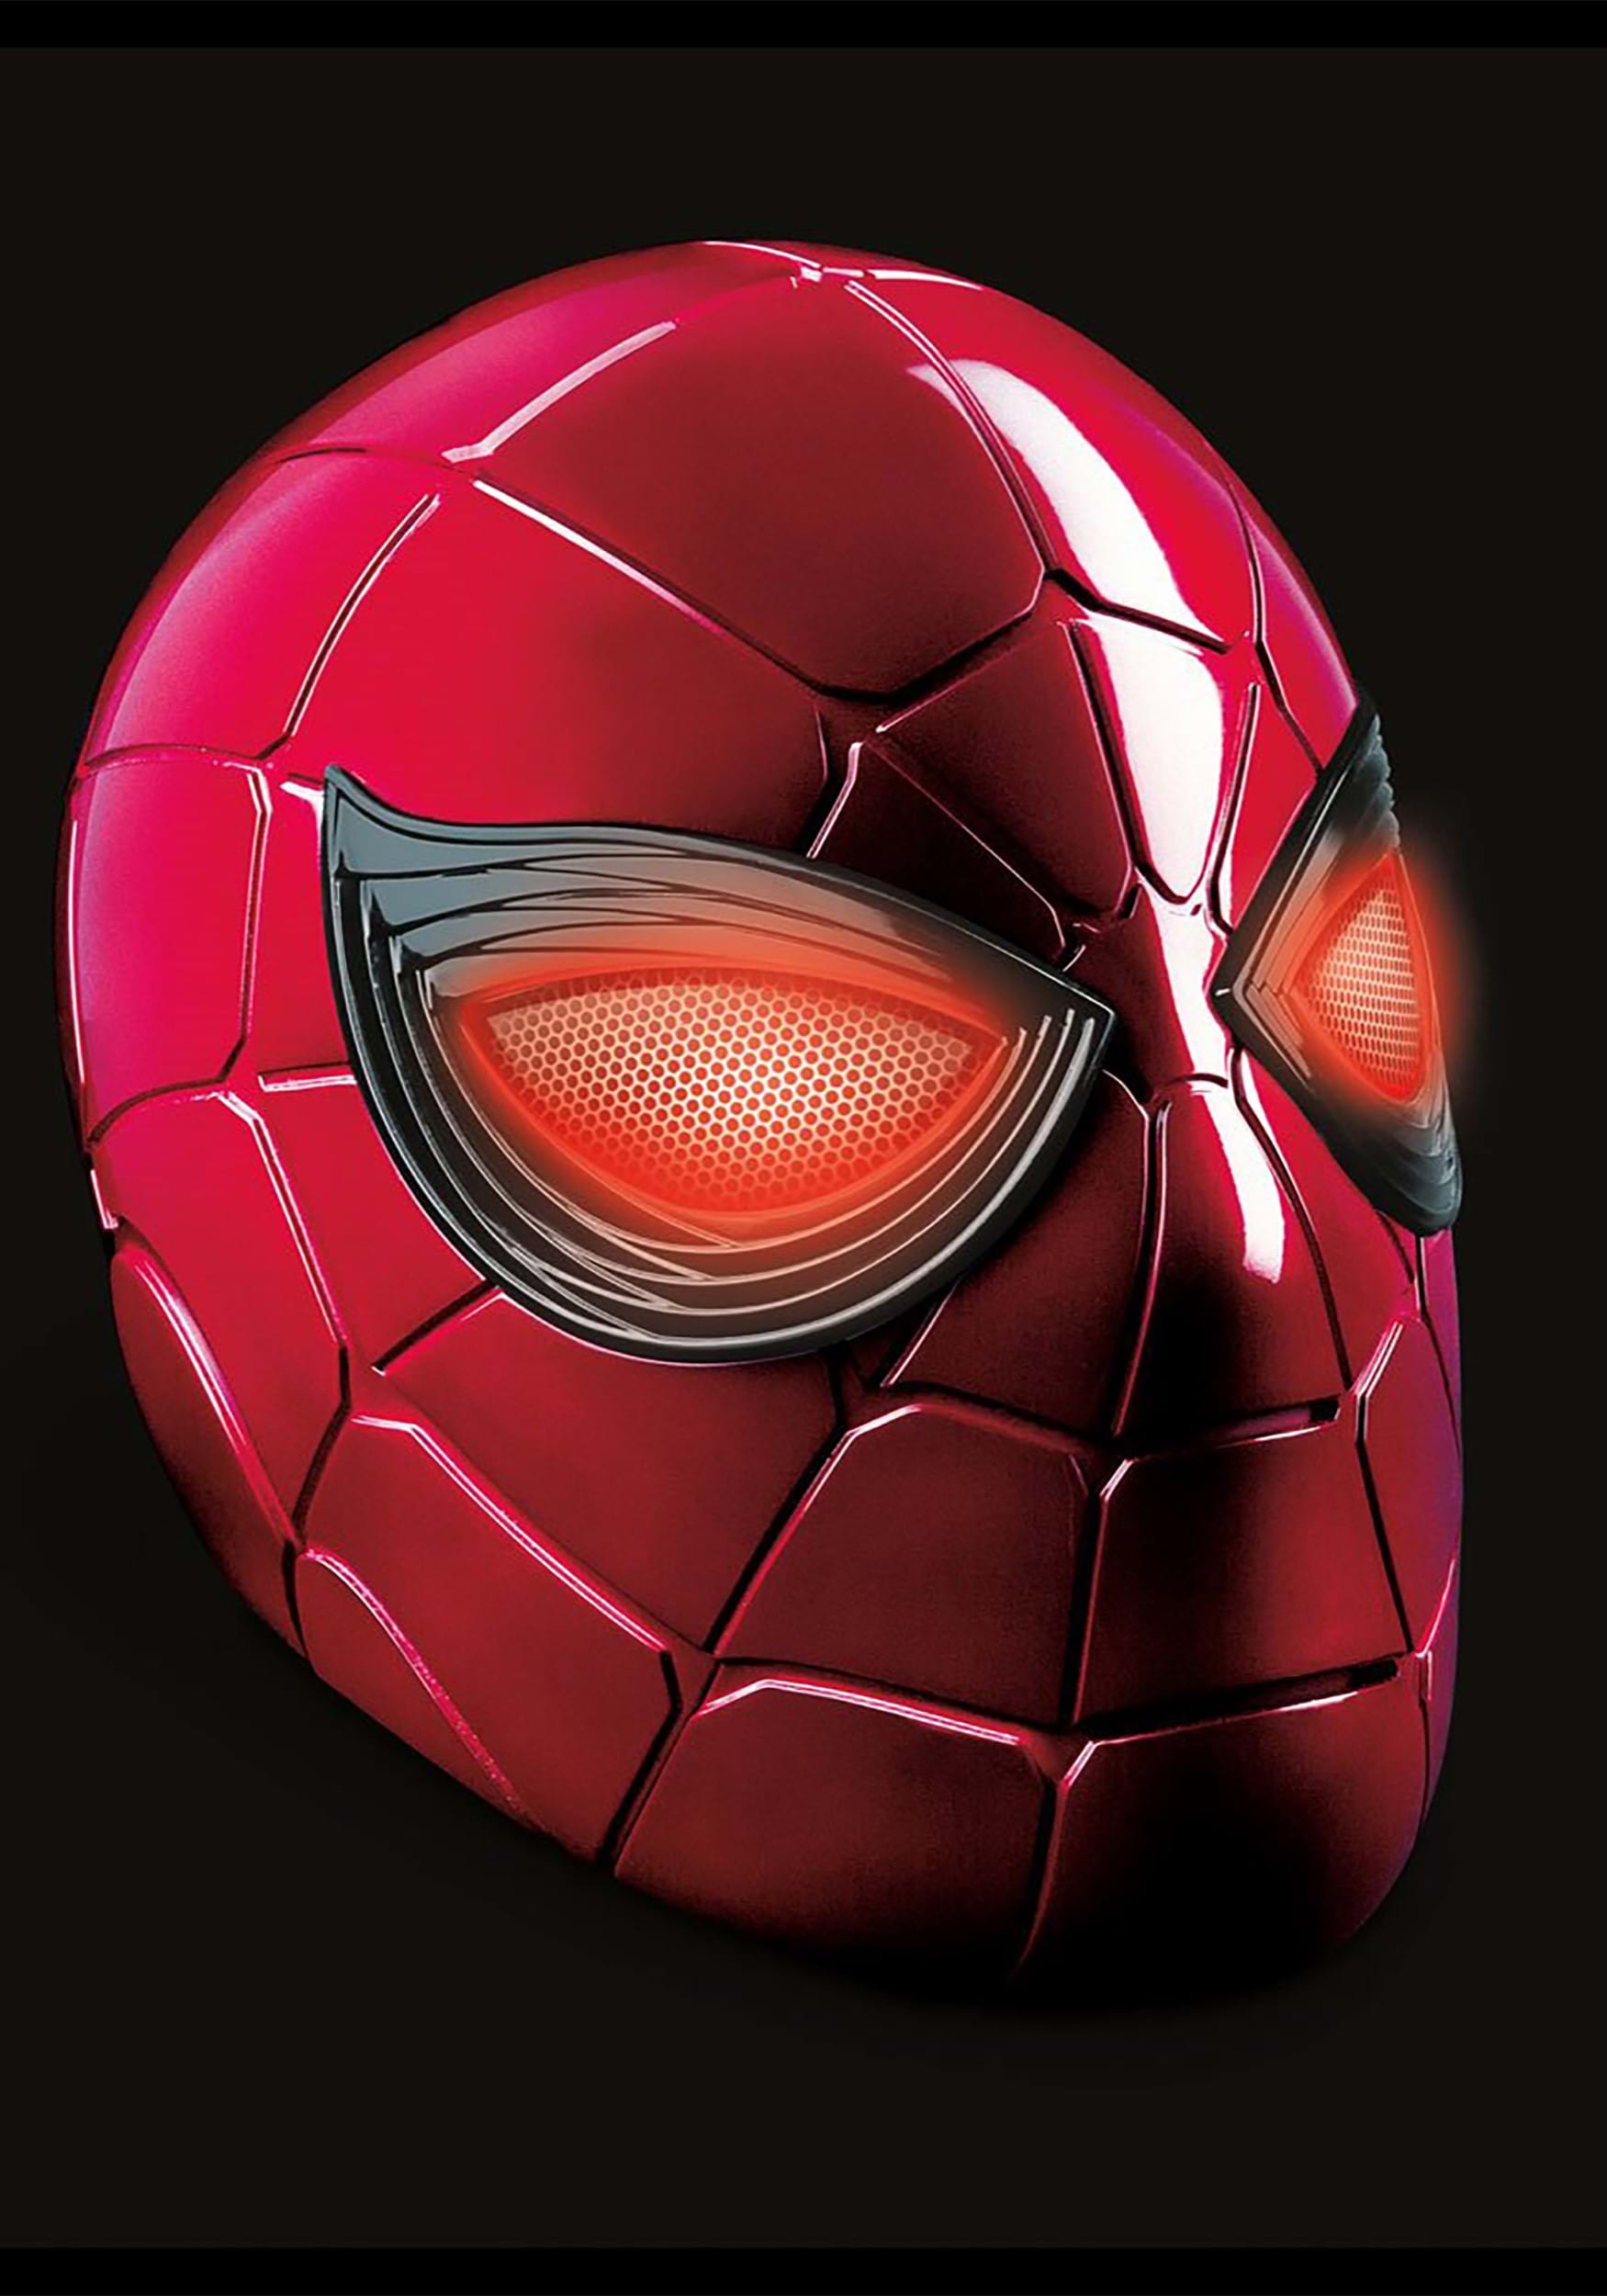 Déguisement Spider-Man Marvel Studios No way Home Taille S